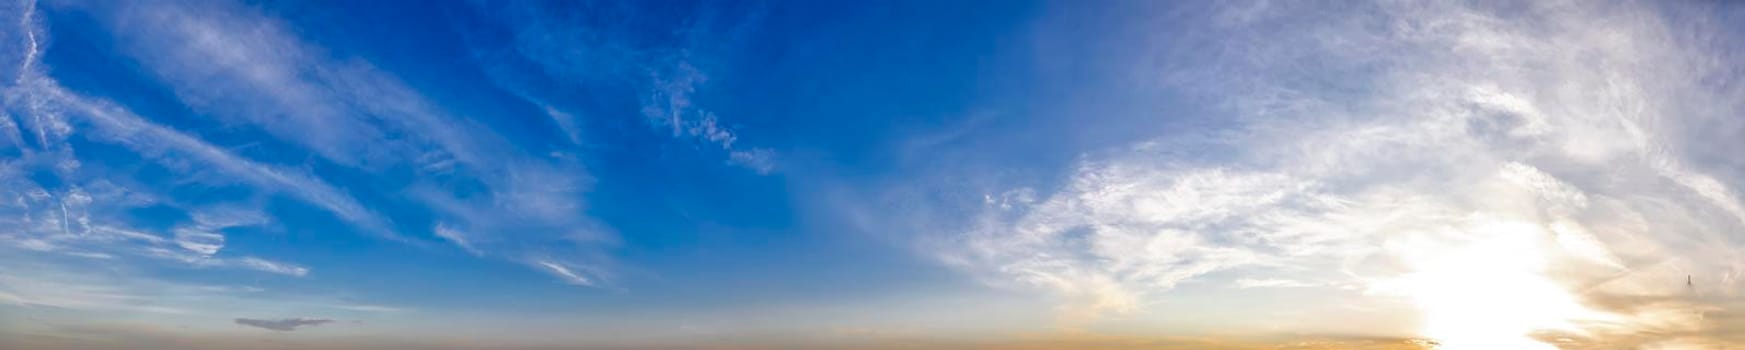 Panoramic view of blue sky with clouds and sun.